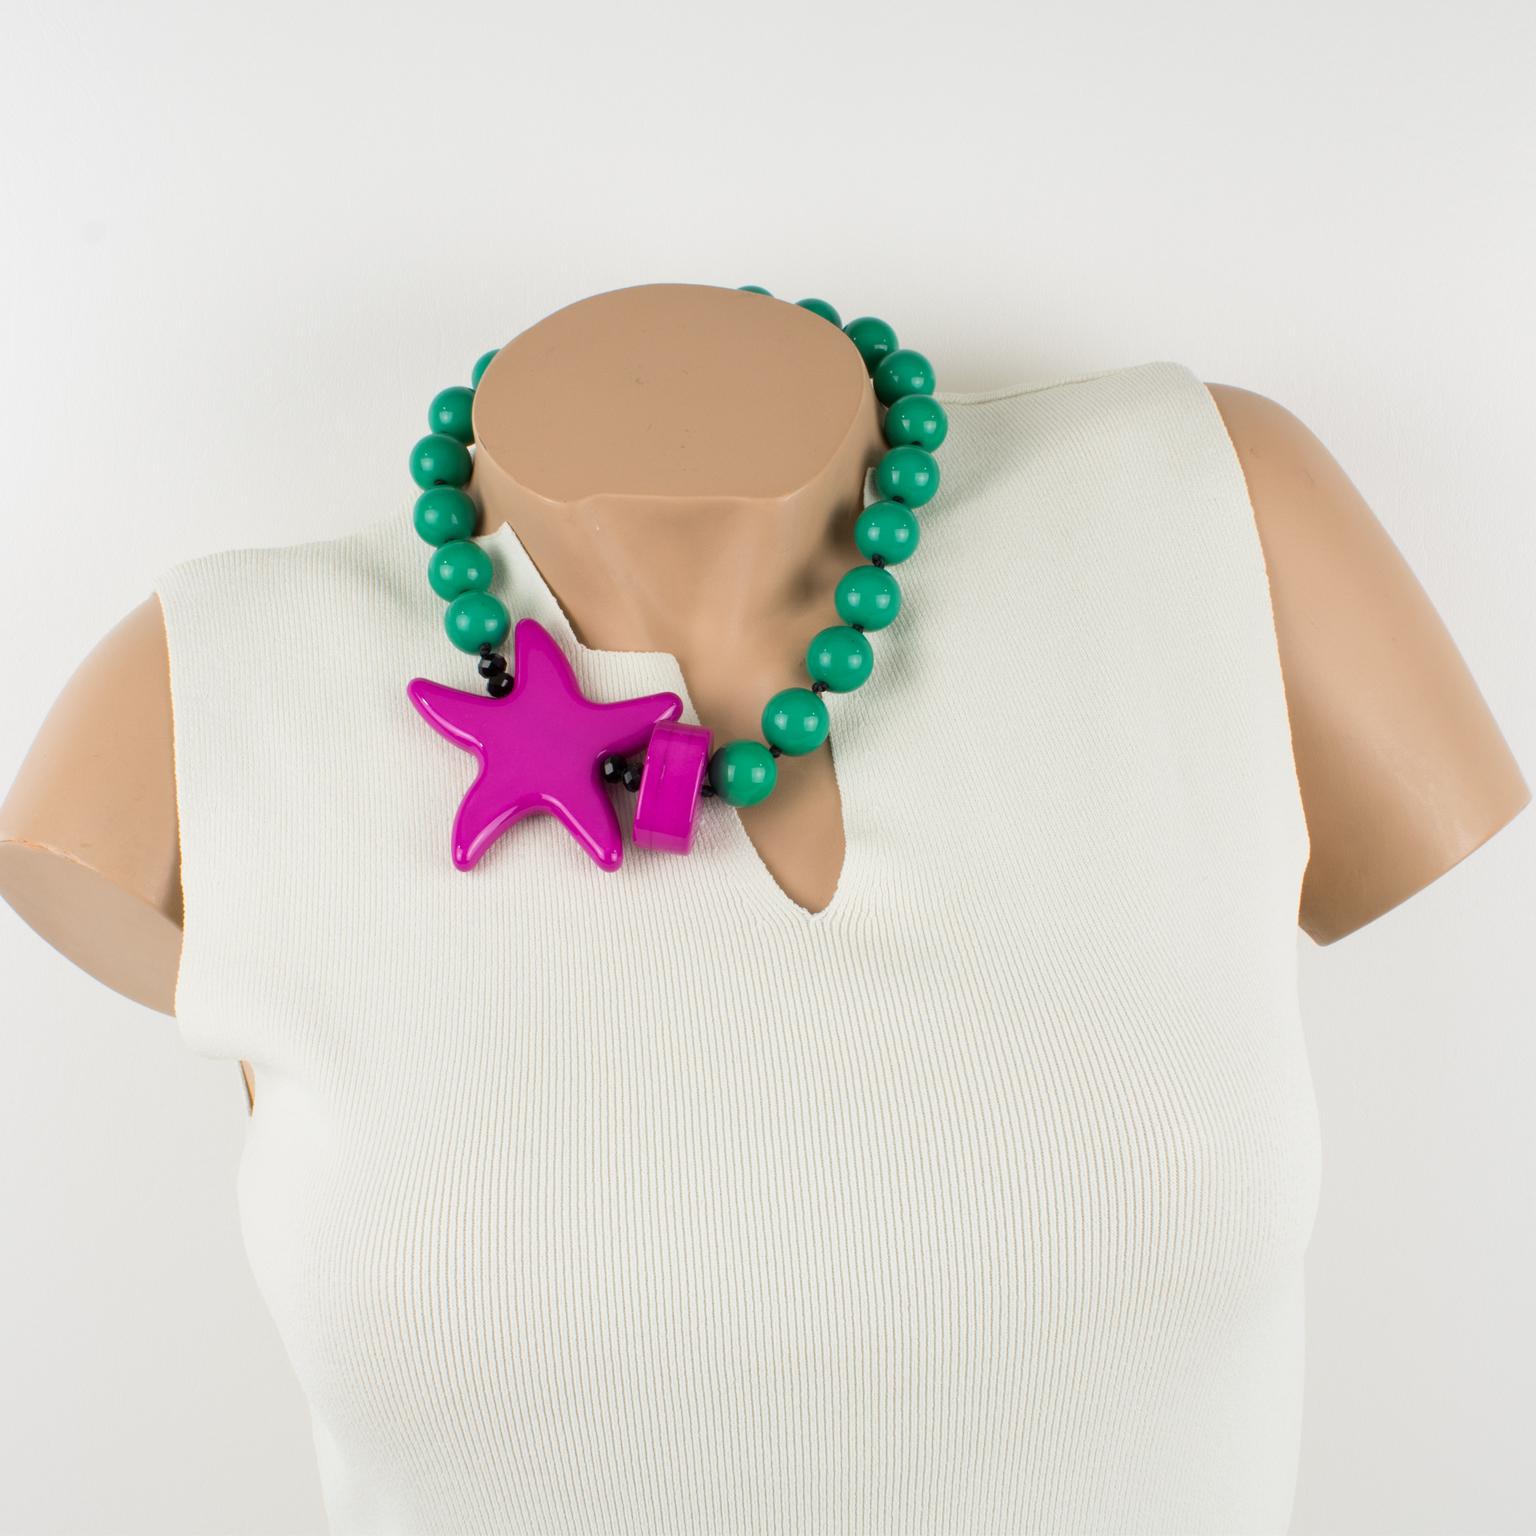 Elegant Angela Caputi, made in Italy resin choker necklace. Working on turquoise with hot pink contrast, this necklace features chunky rounded beads with a side carved starfish and pebble elements. Her matching of colors is always extremely classy,